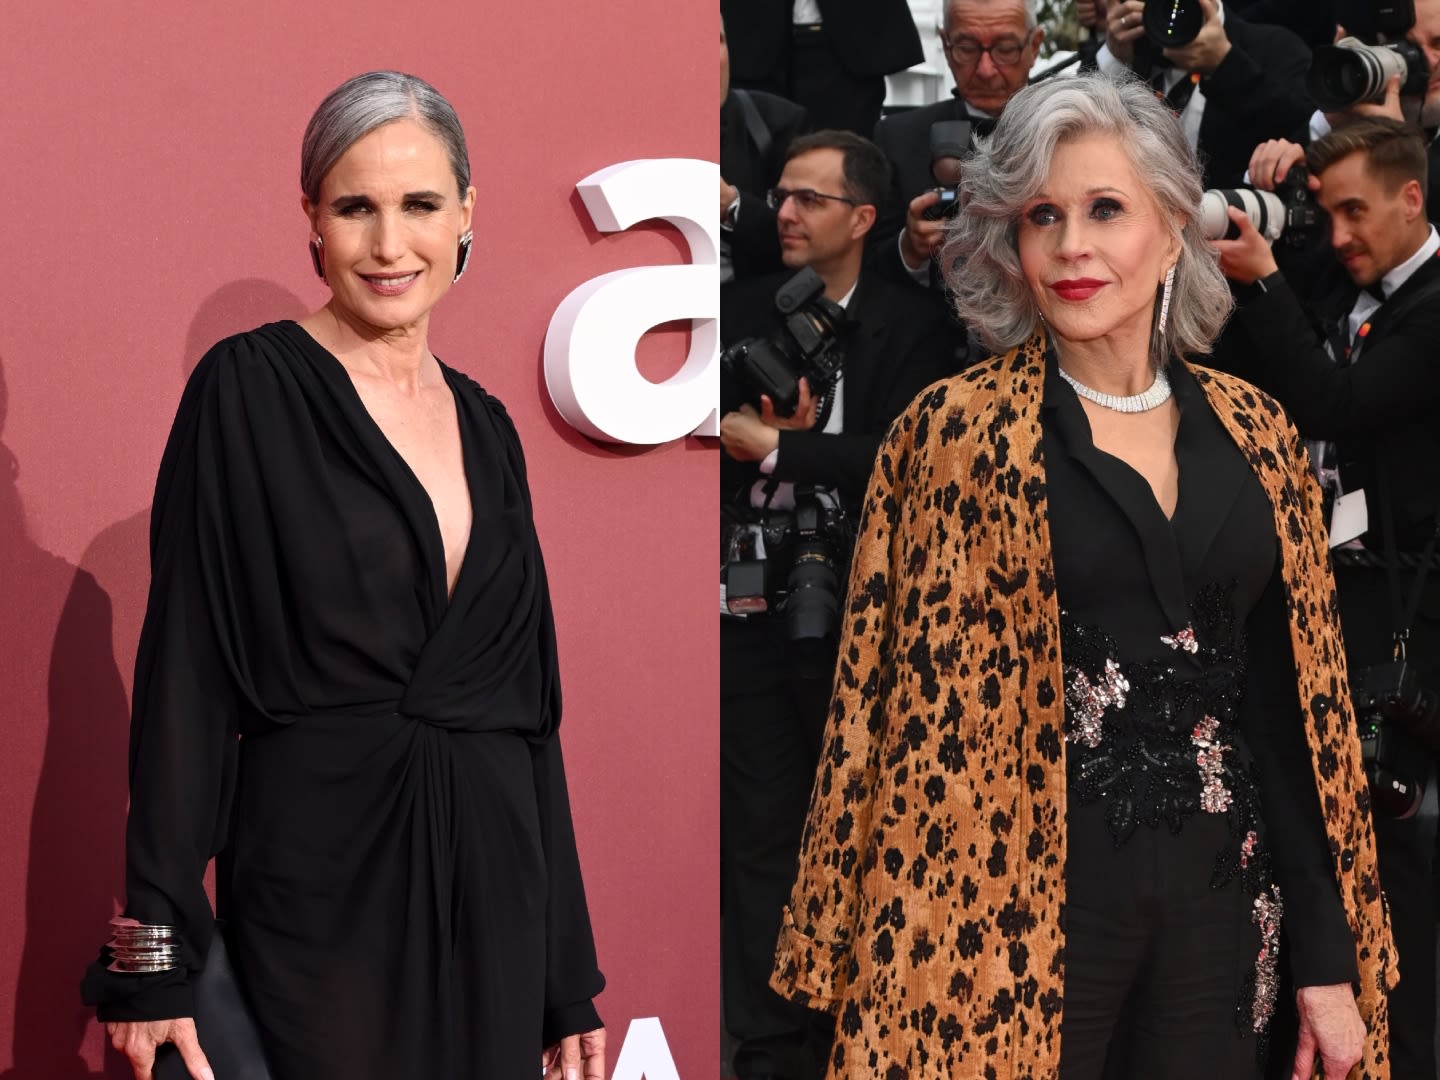 Celebrity Women With Gorgeous Gray Hair on the Red Carpet: Photos